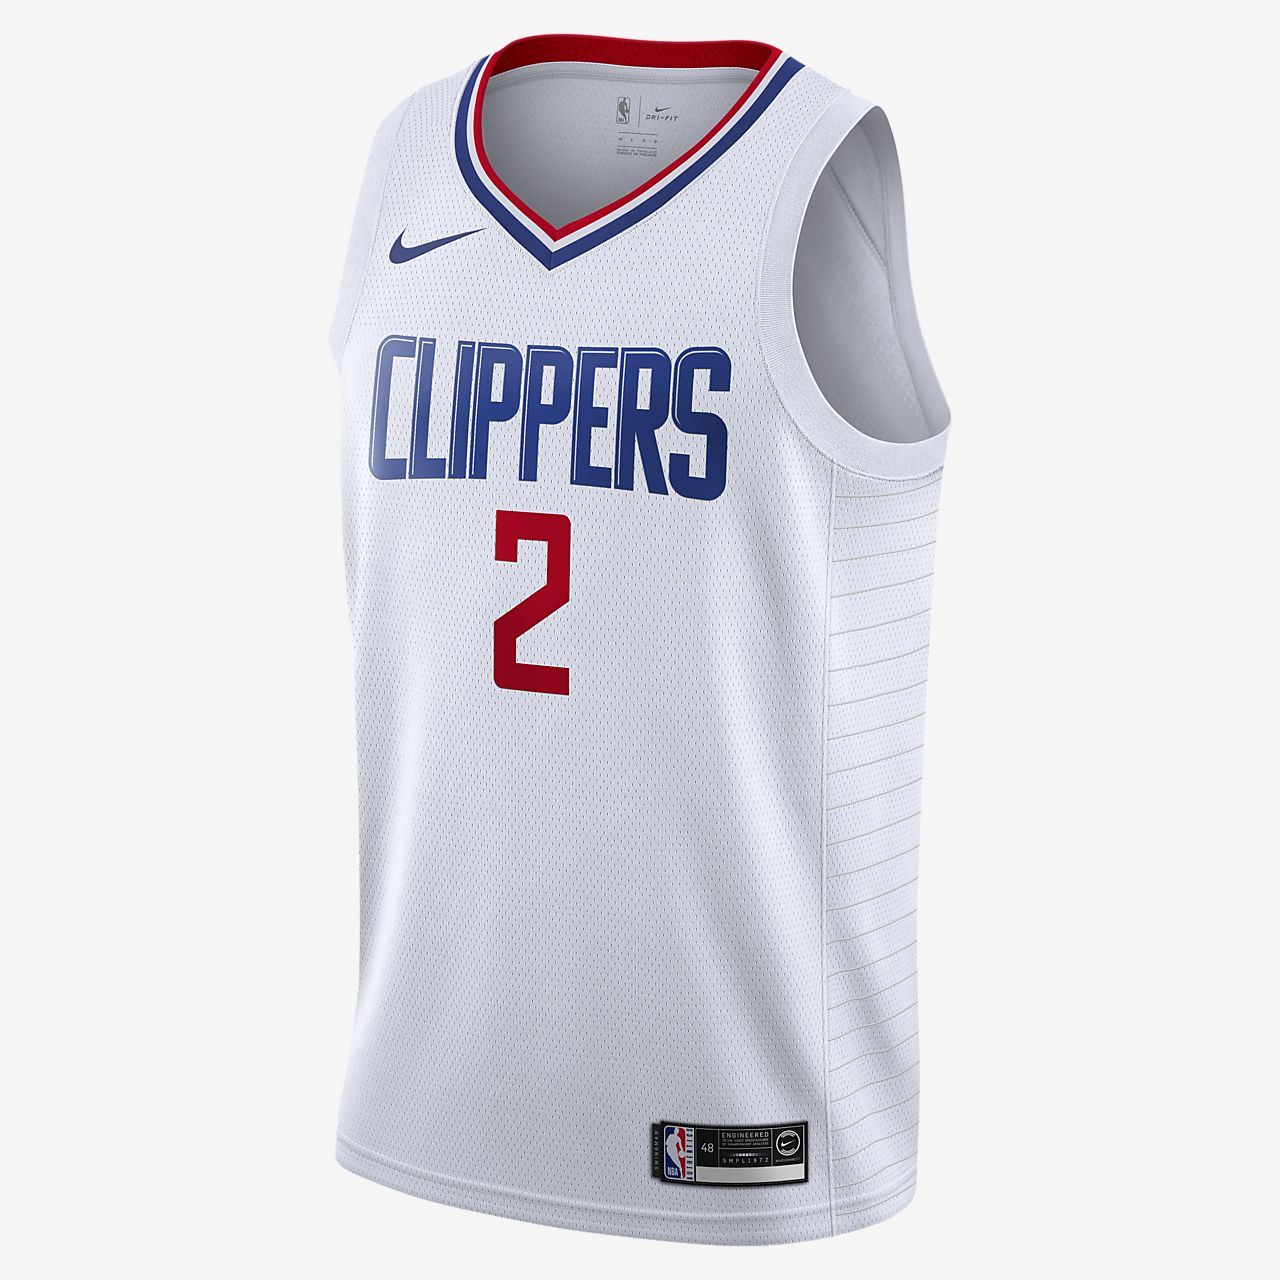 kawhi in clippers jersey